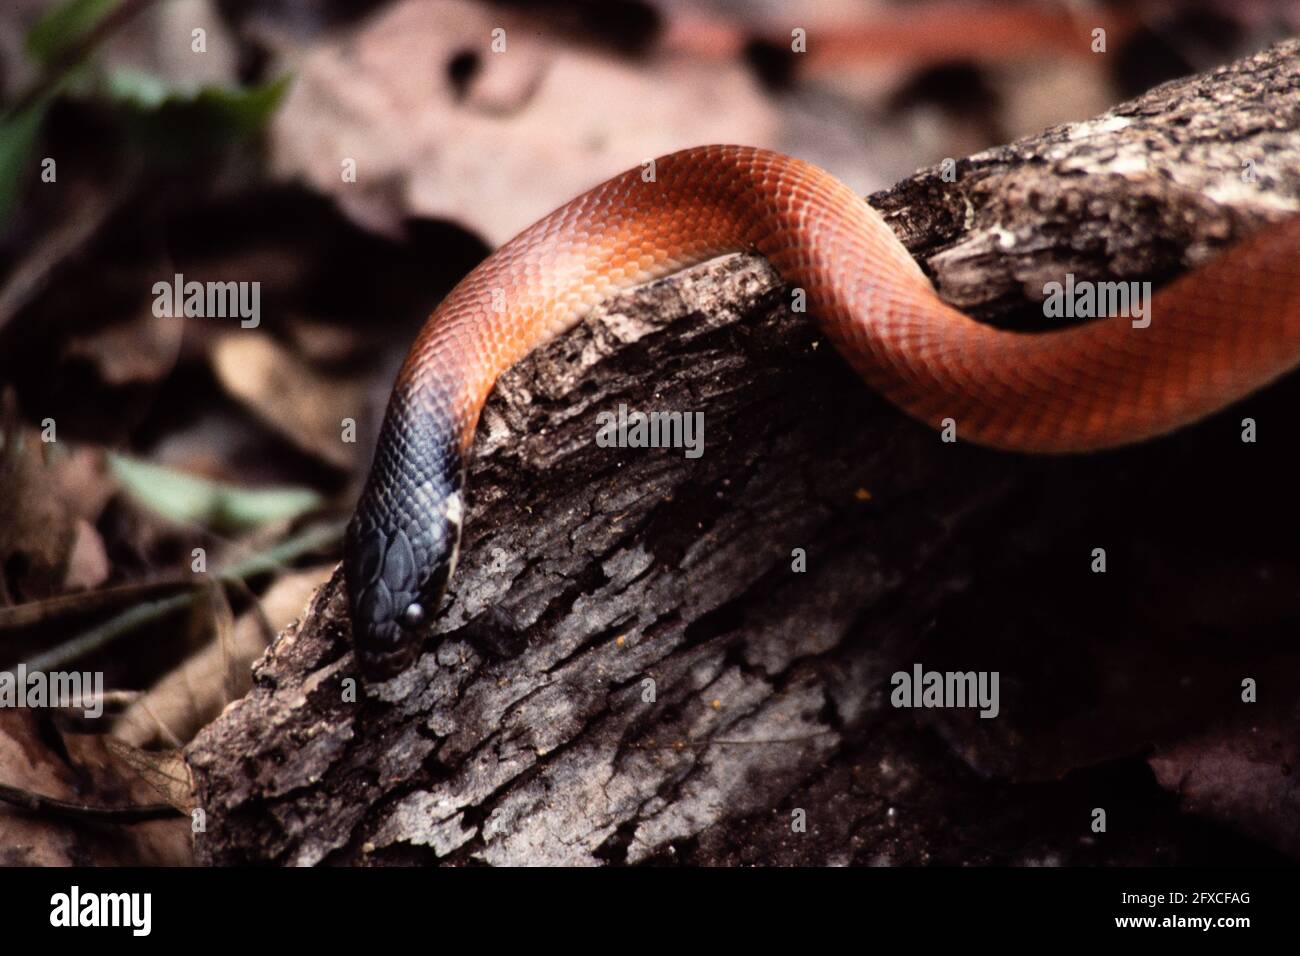 A juvenile Mussurana, Clelia clelia, in Panama.  Mussurana prey exclusively on snakes, especially venomous ones. Stock Photo